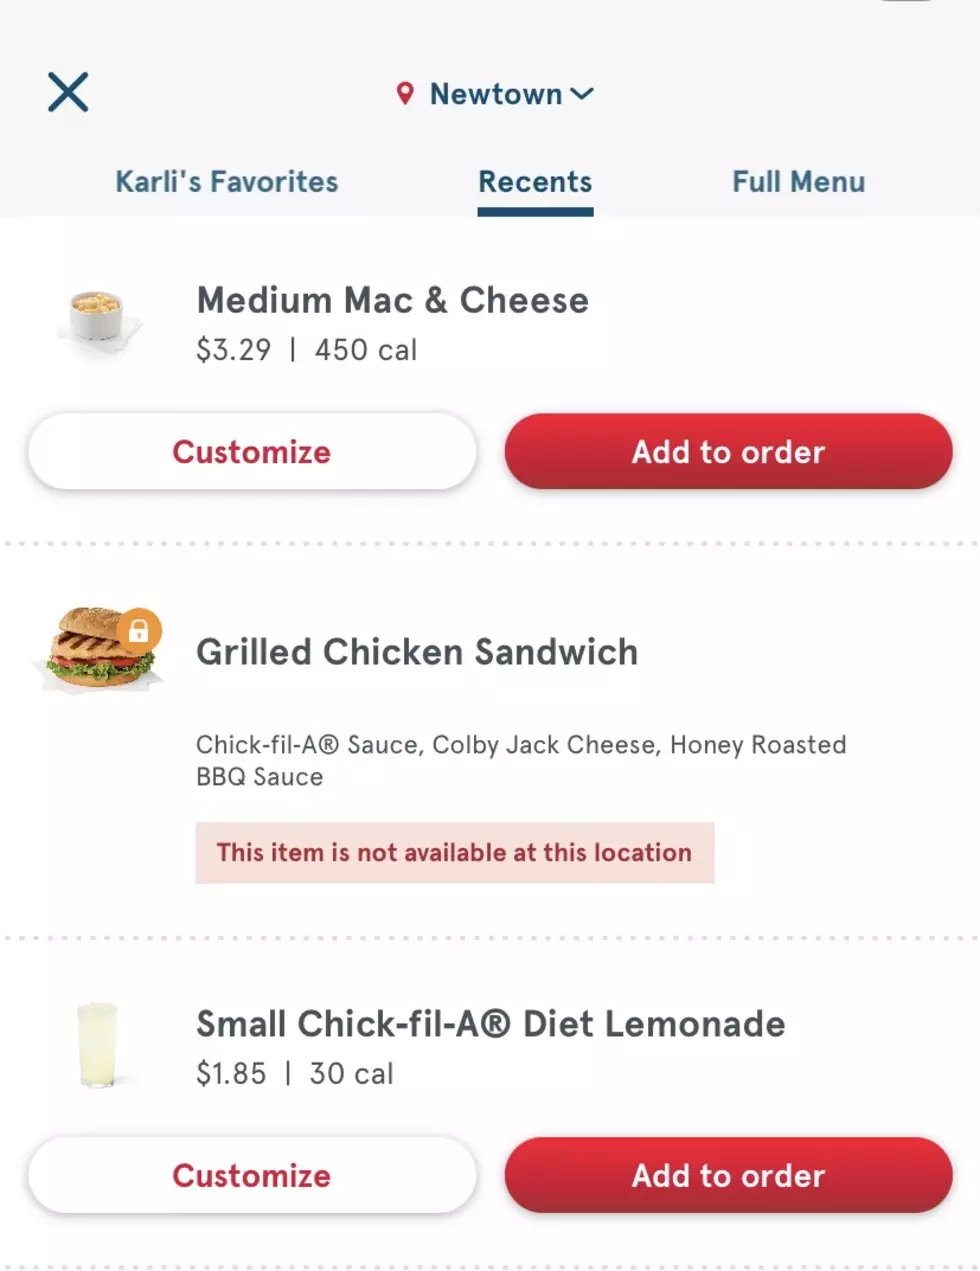 Chick-fil-A In Newtown Gets Rid Of Their Grilled Chicken Sandwich